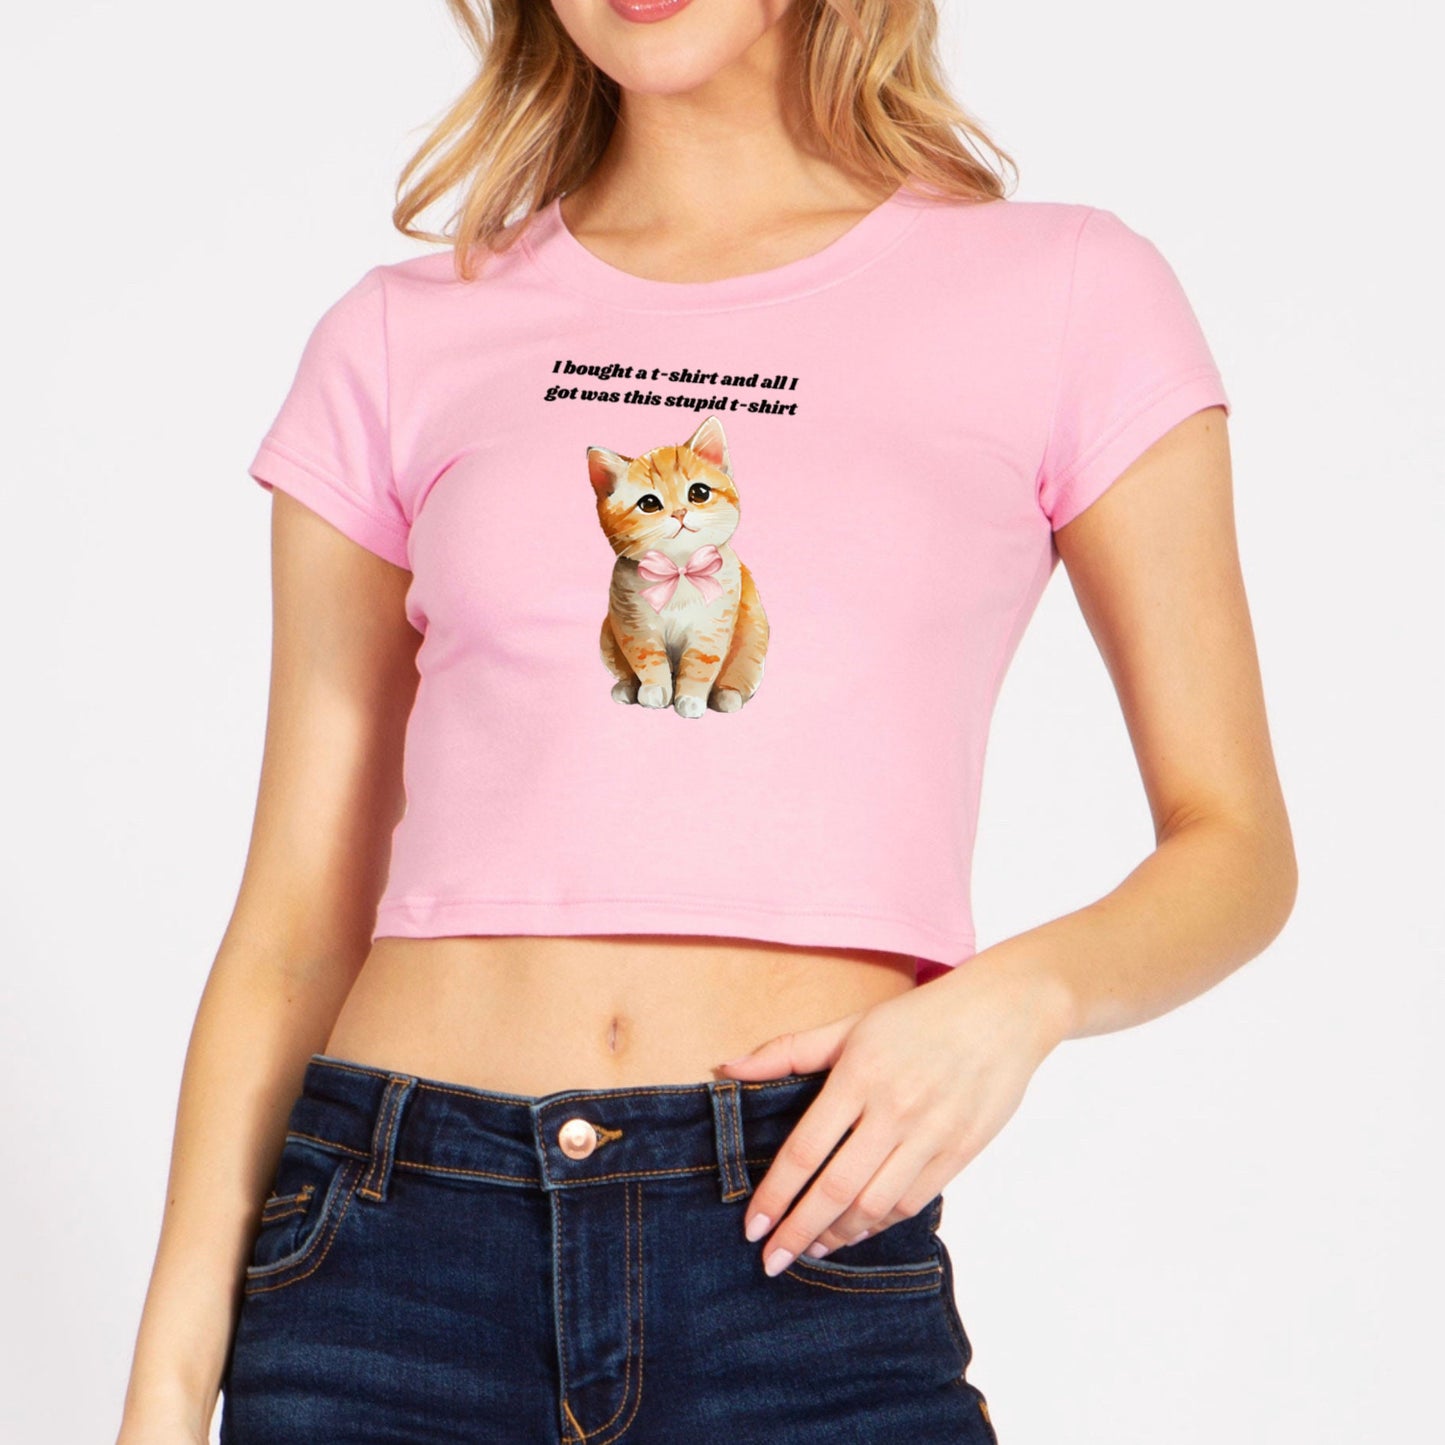 I Bought a T-Shirt and all I Got Was This Stupid T-Shirt Crop Top